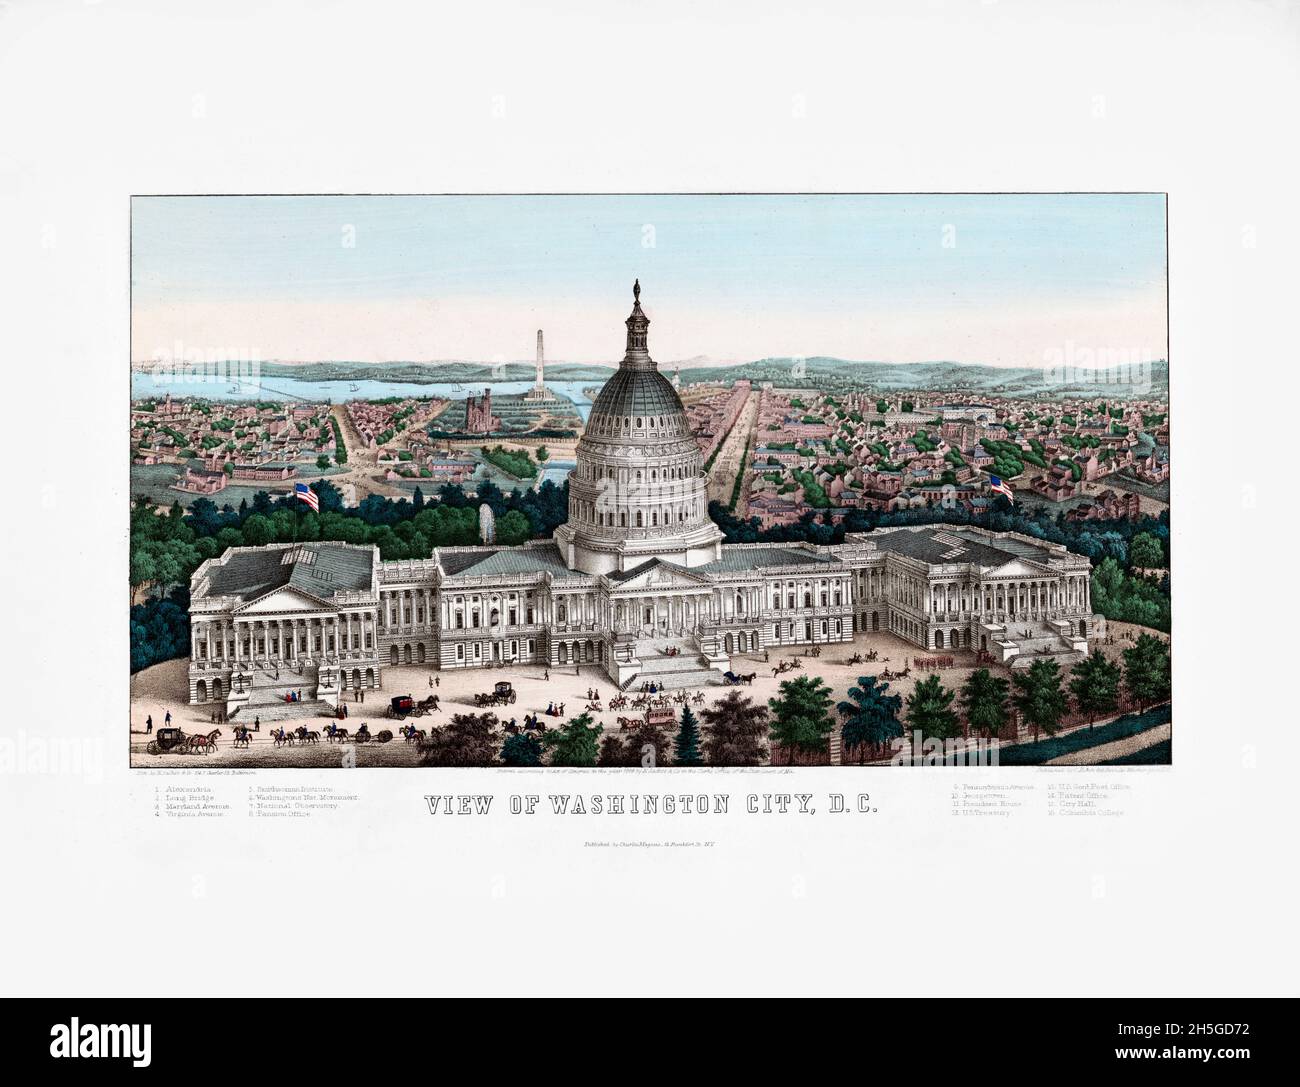 View of Washington City, D.C. / lith. by E. Sachse & Co. 104 S. Charles St. Baltimore. Bird's-eye view print. 1862. U.S. Capitol in the foreground. Stock Photo